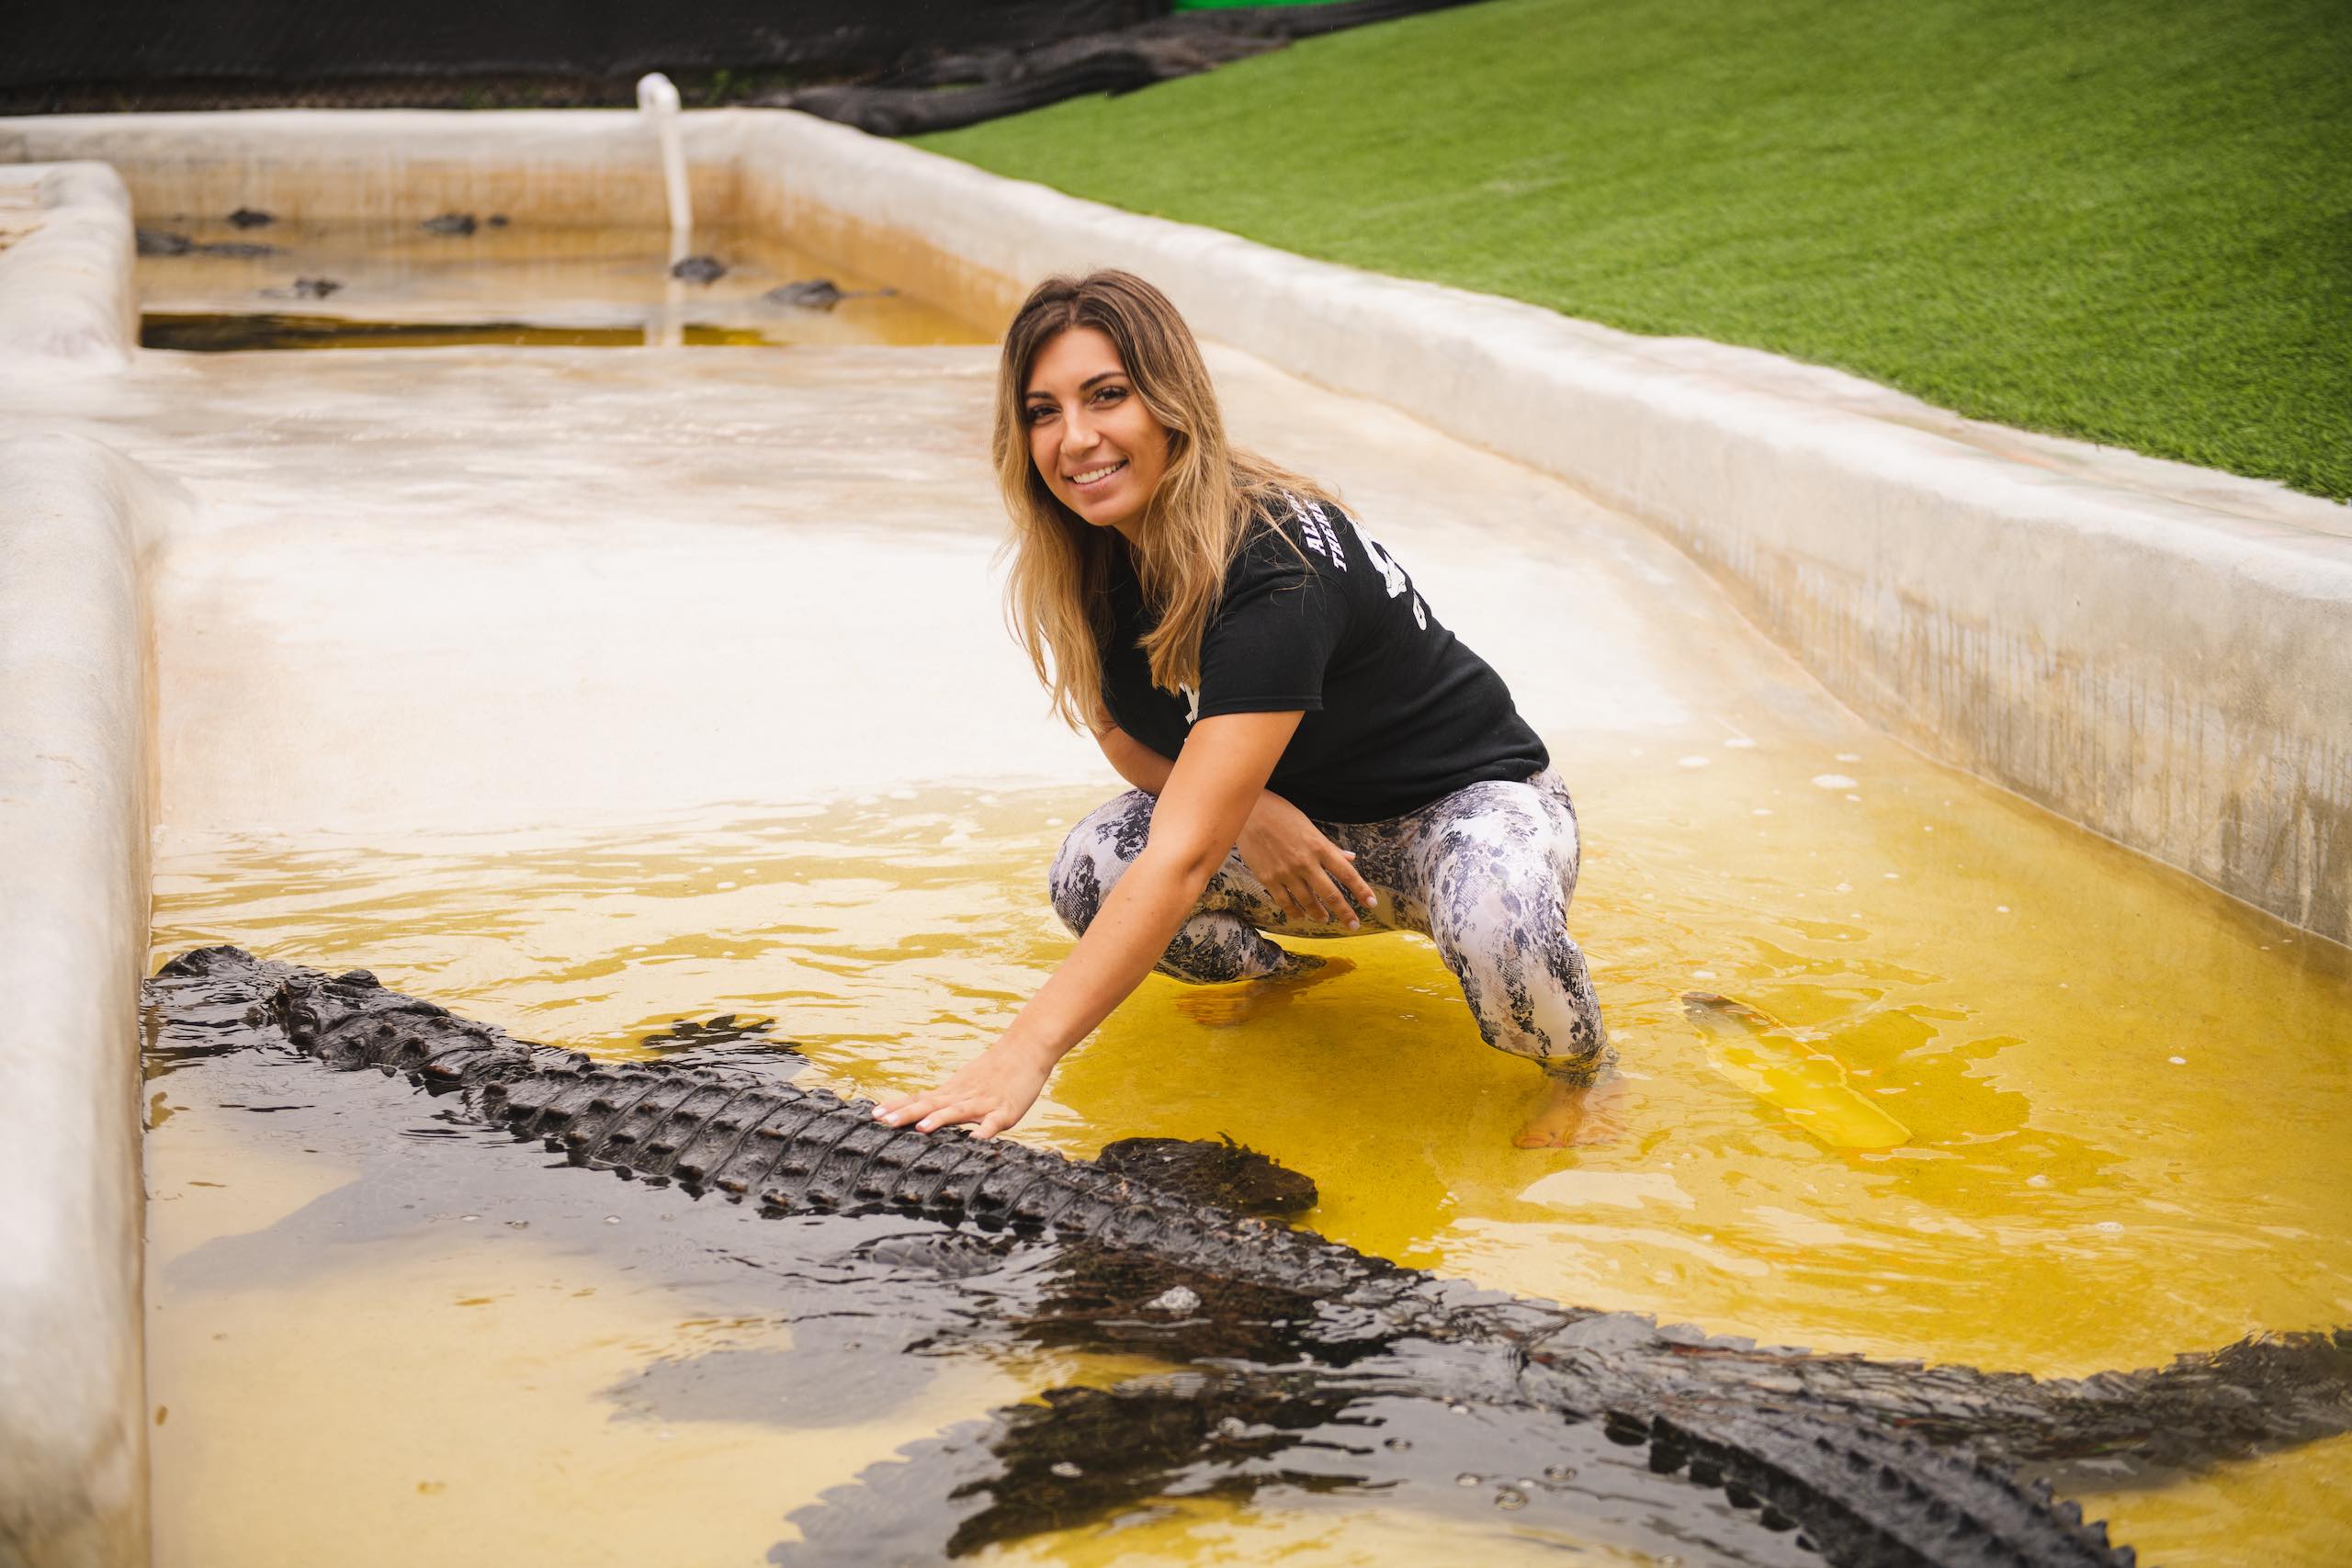 Everglades Holiday Park Woman with long blond hair posing with an alligator in water